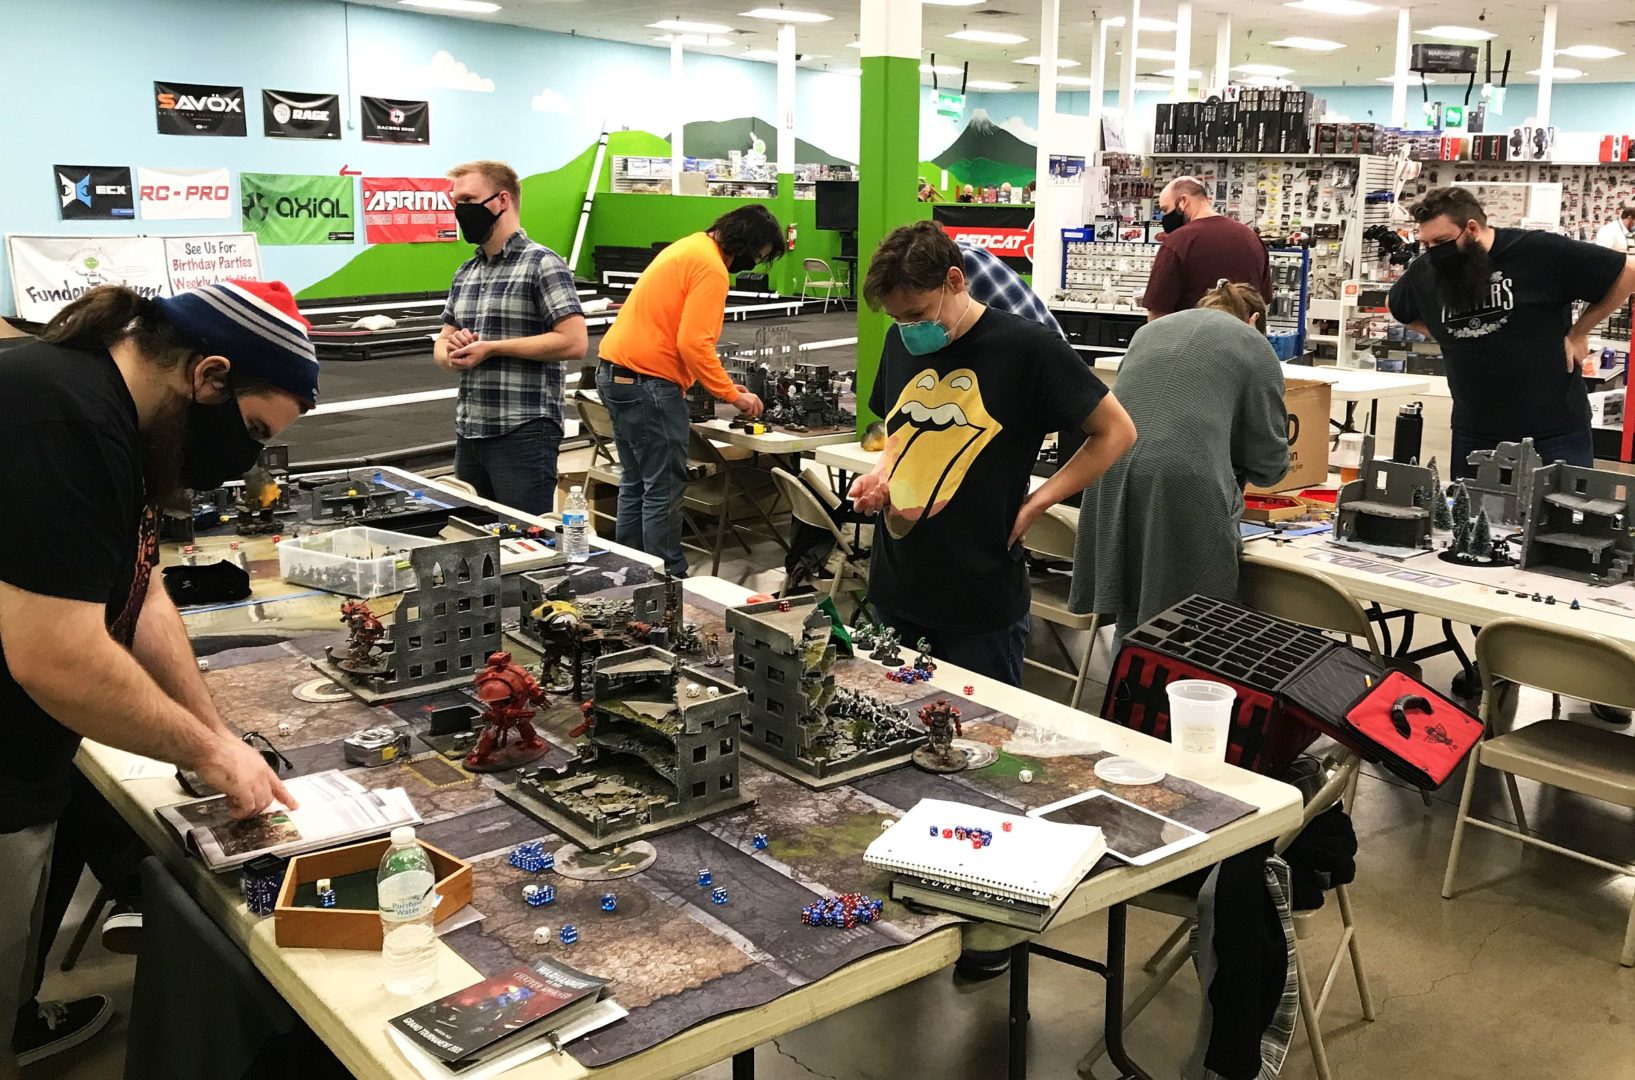 Enthusiasts gather around a table for a Warhammer game, deeply engaged in strategic play amid a detailed miniature battlefield setup, with various painted figures and terrain pieces in a hobby gaming store